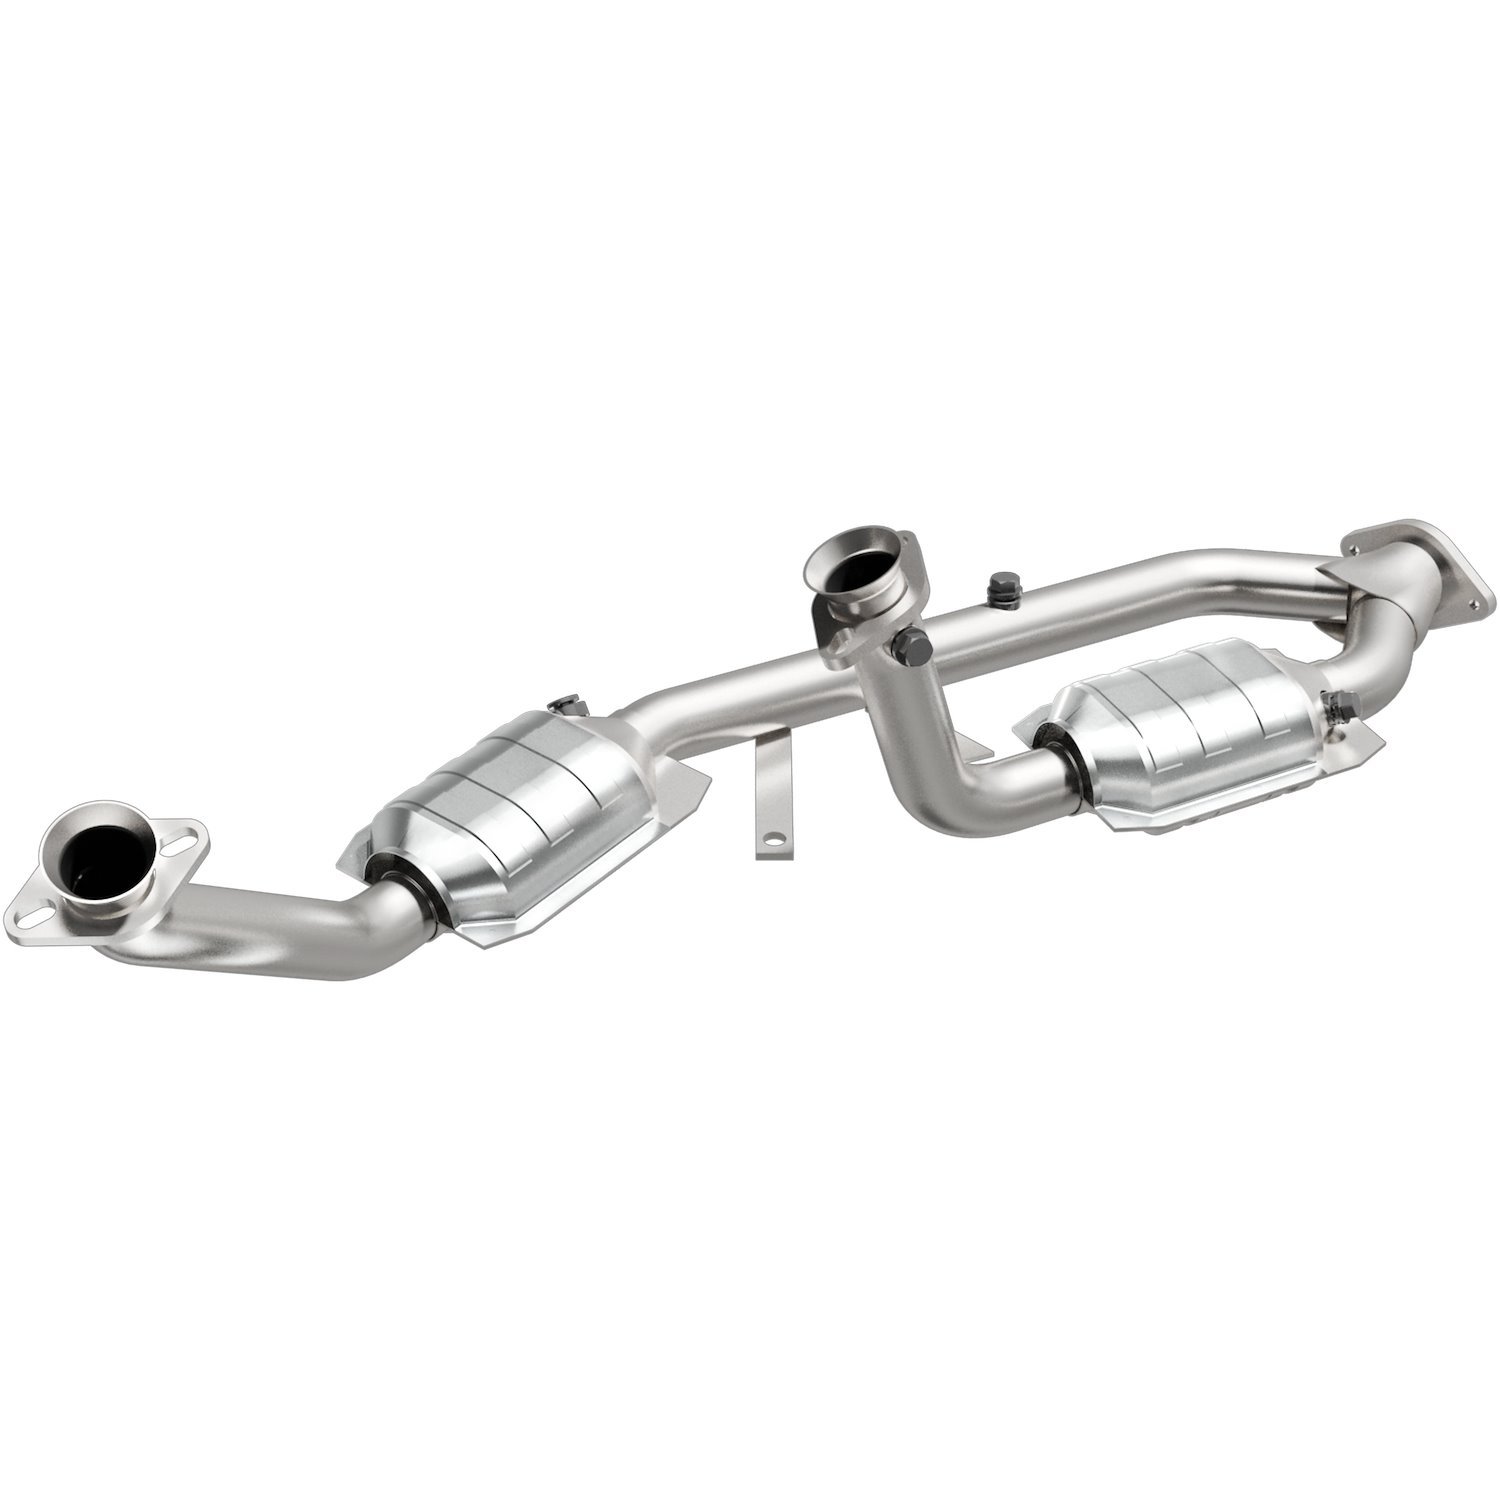 1997-1998 Ford Windstar California Grade CARB Compliant Direct-Fit Catalytic Converter